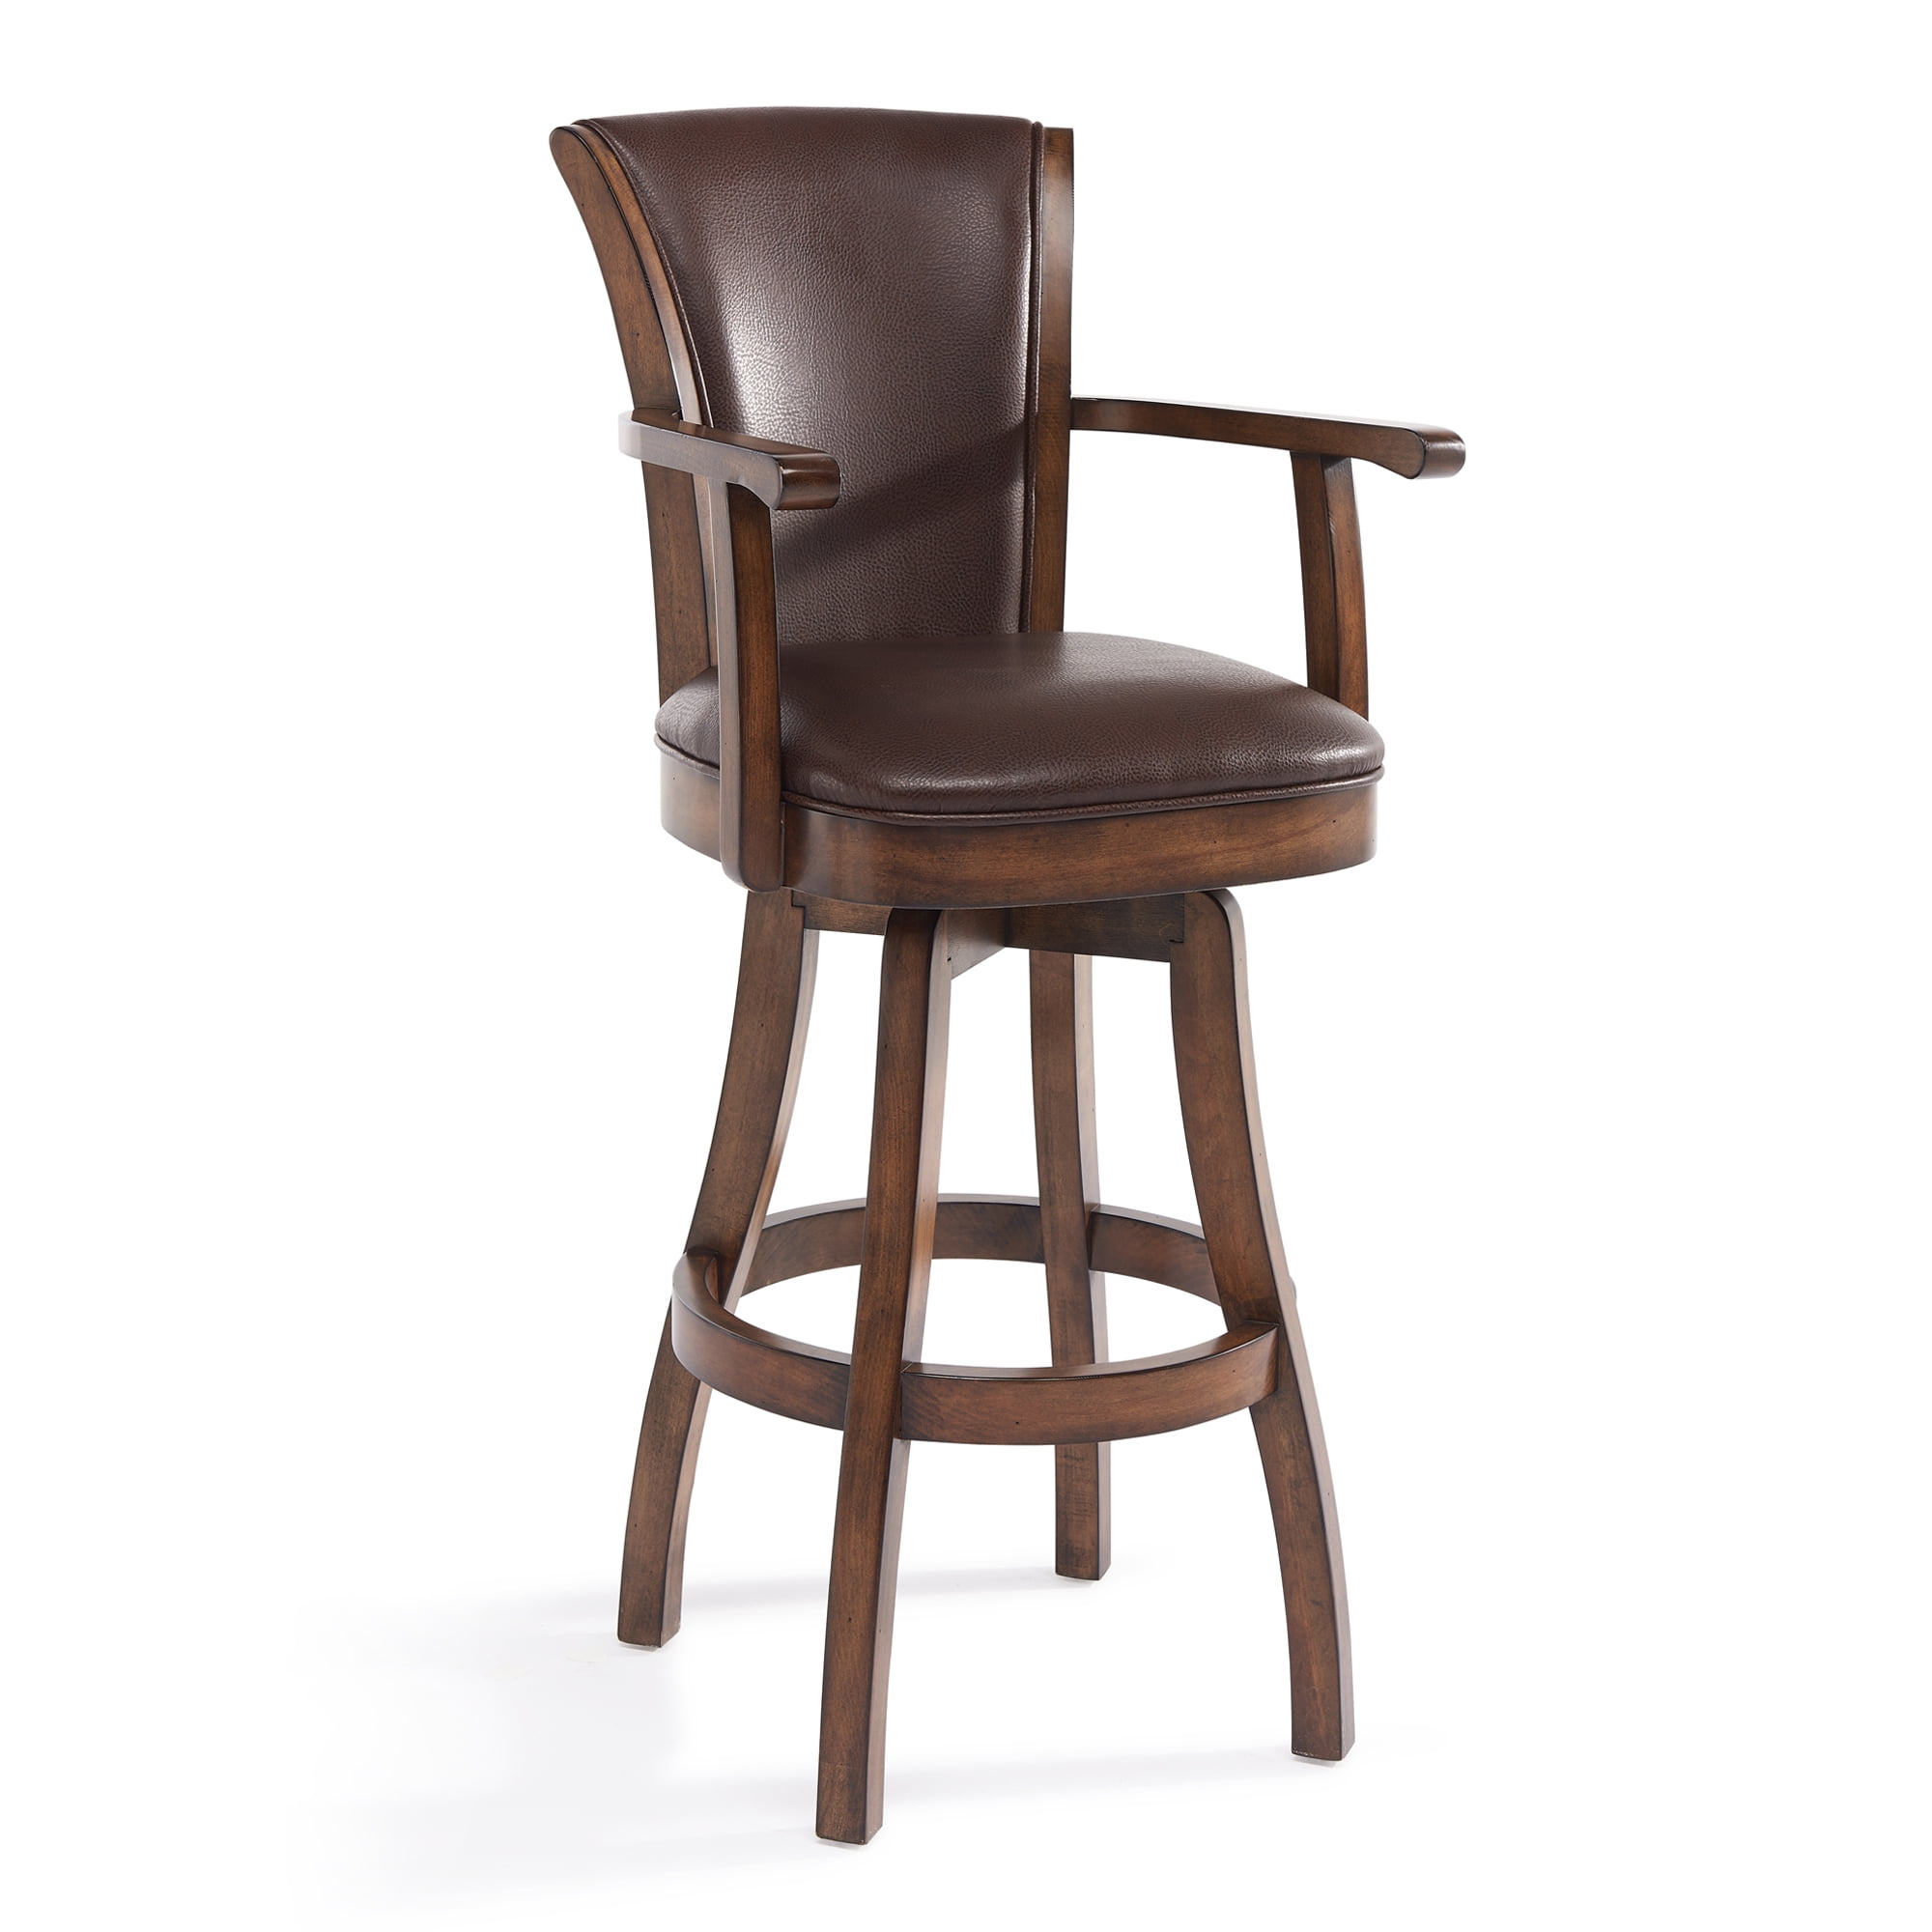 26 Counter Height Swivel Wood Barstool, Rustic Swivel Bar Stools With Backs And Arms